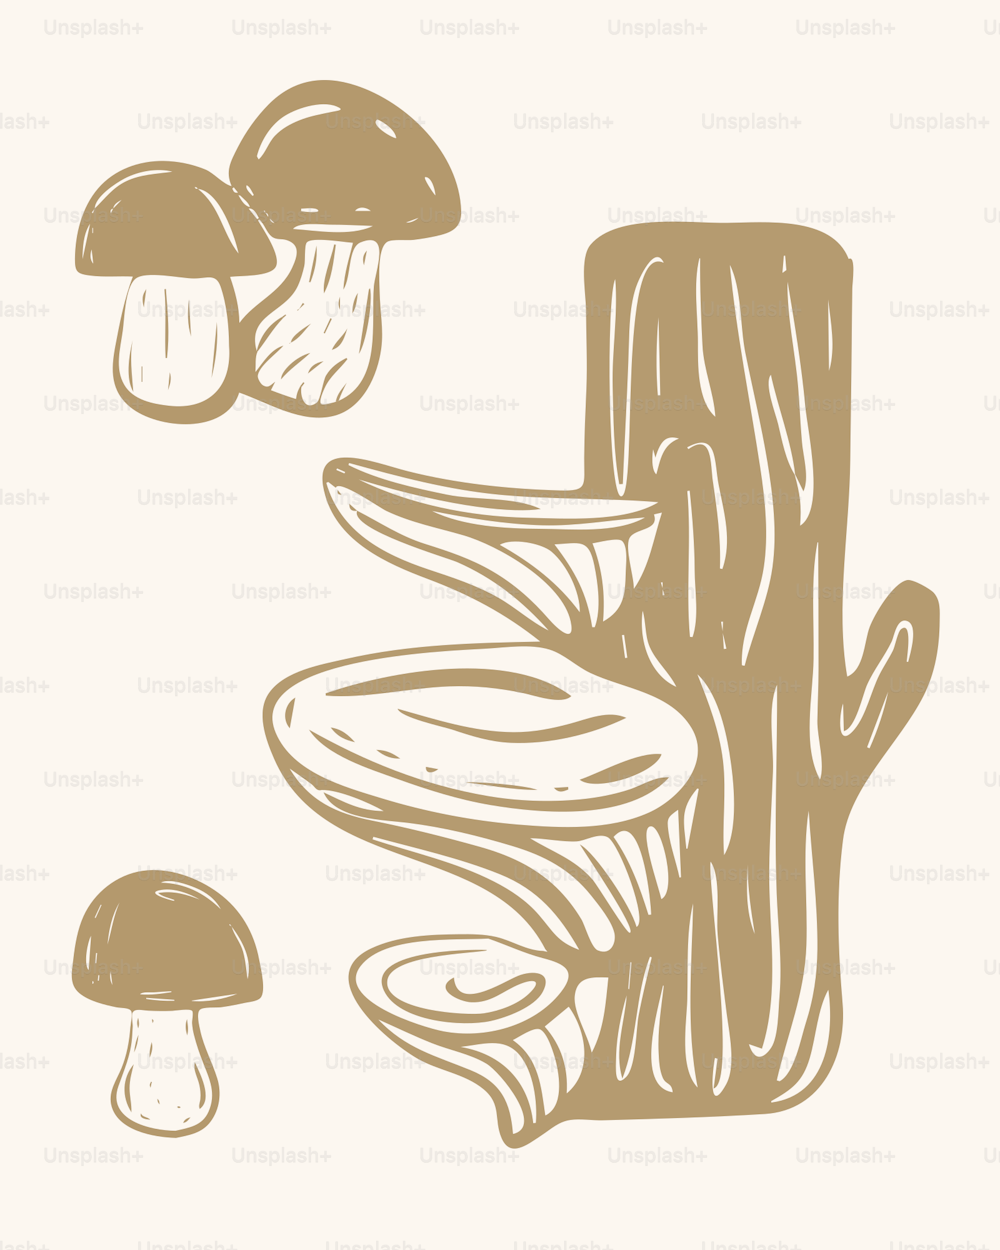 a drawing of mushrooms and a tree stump